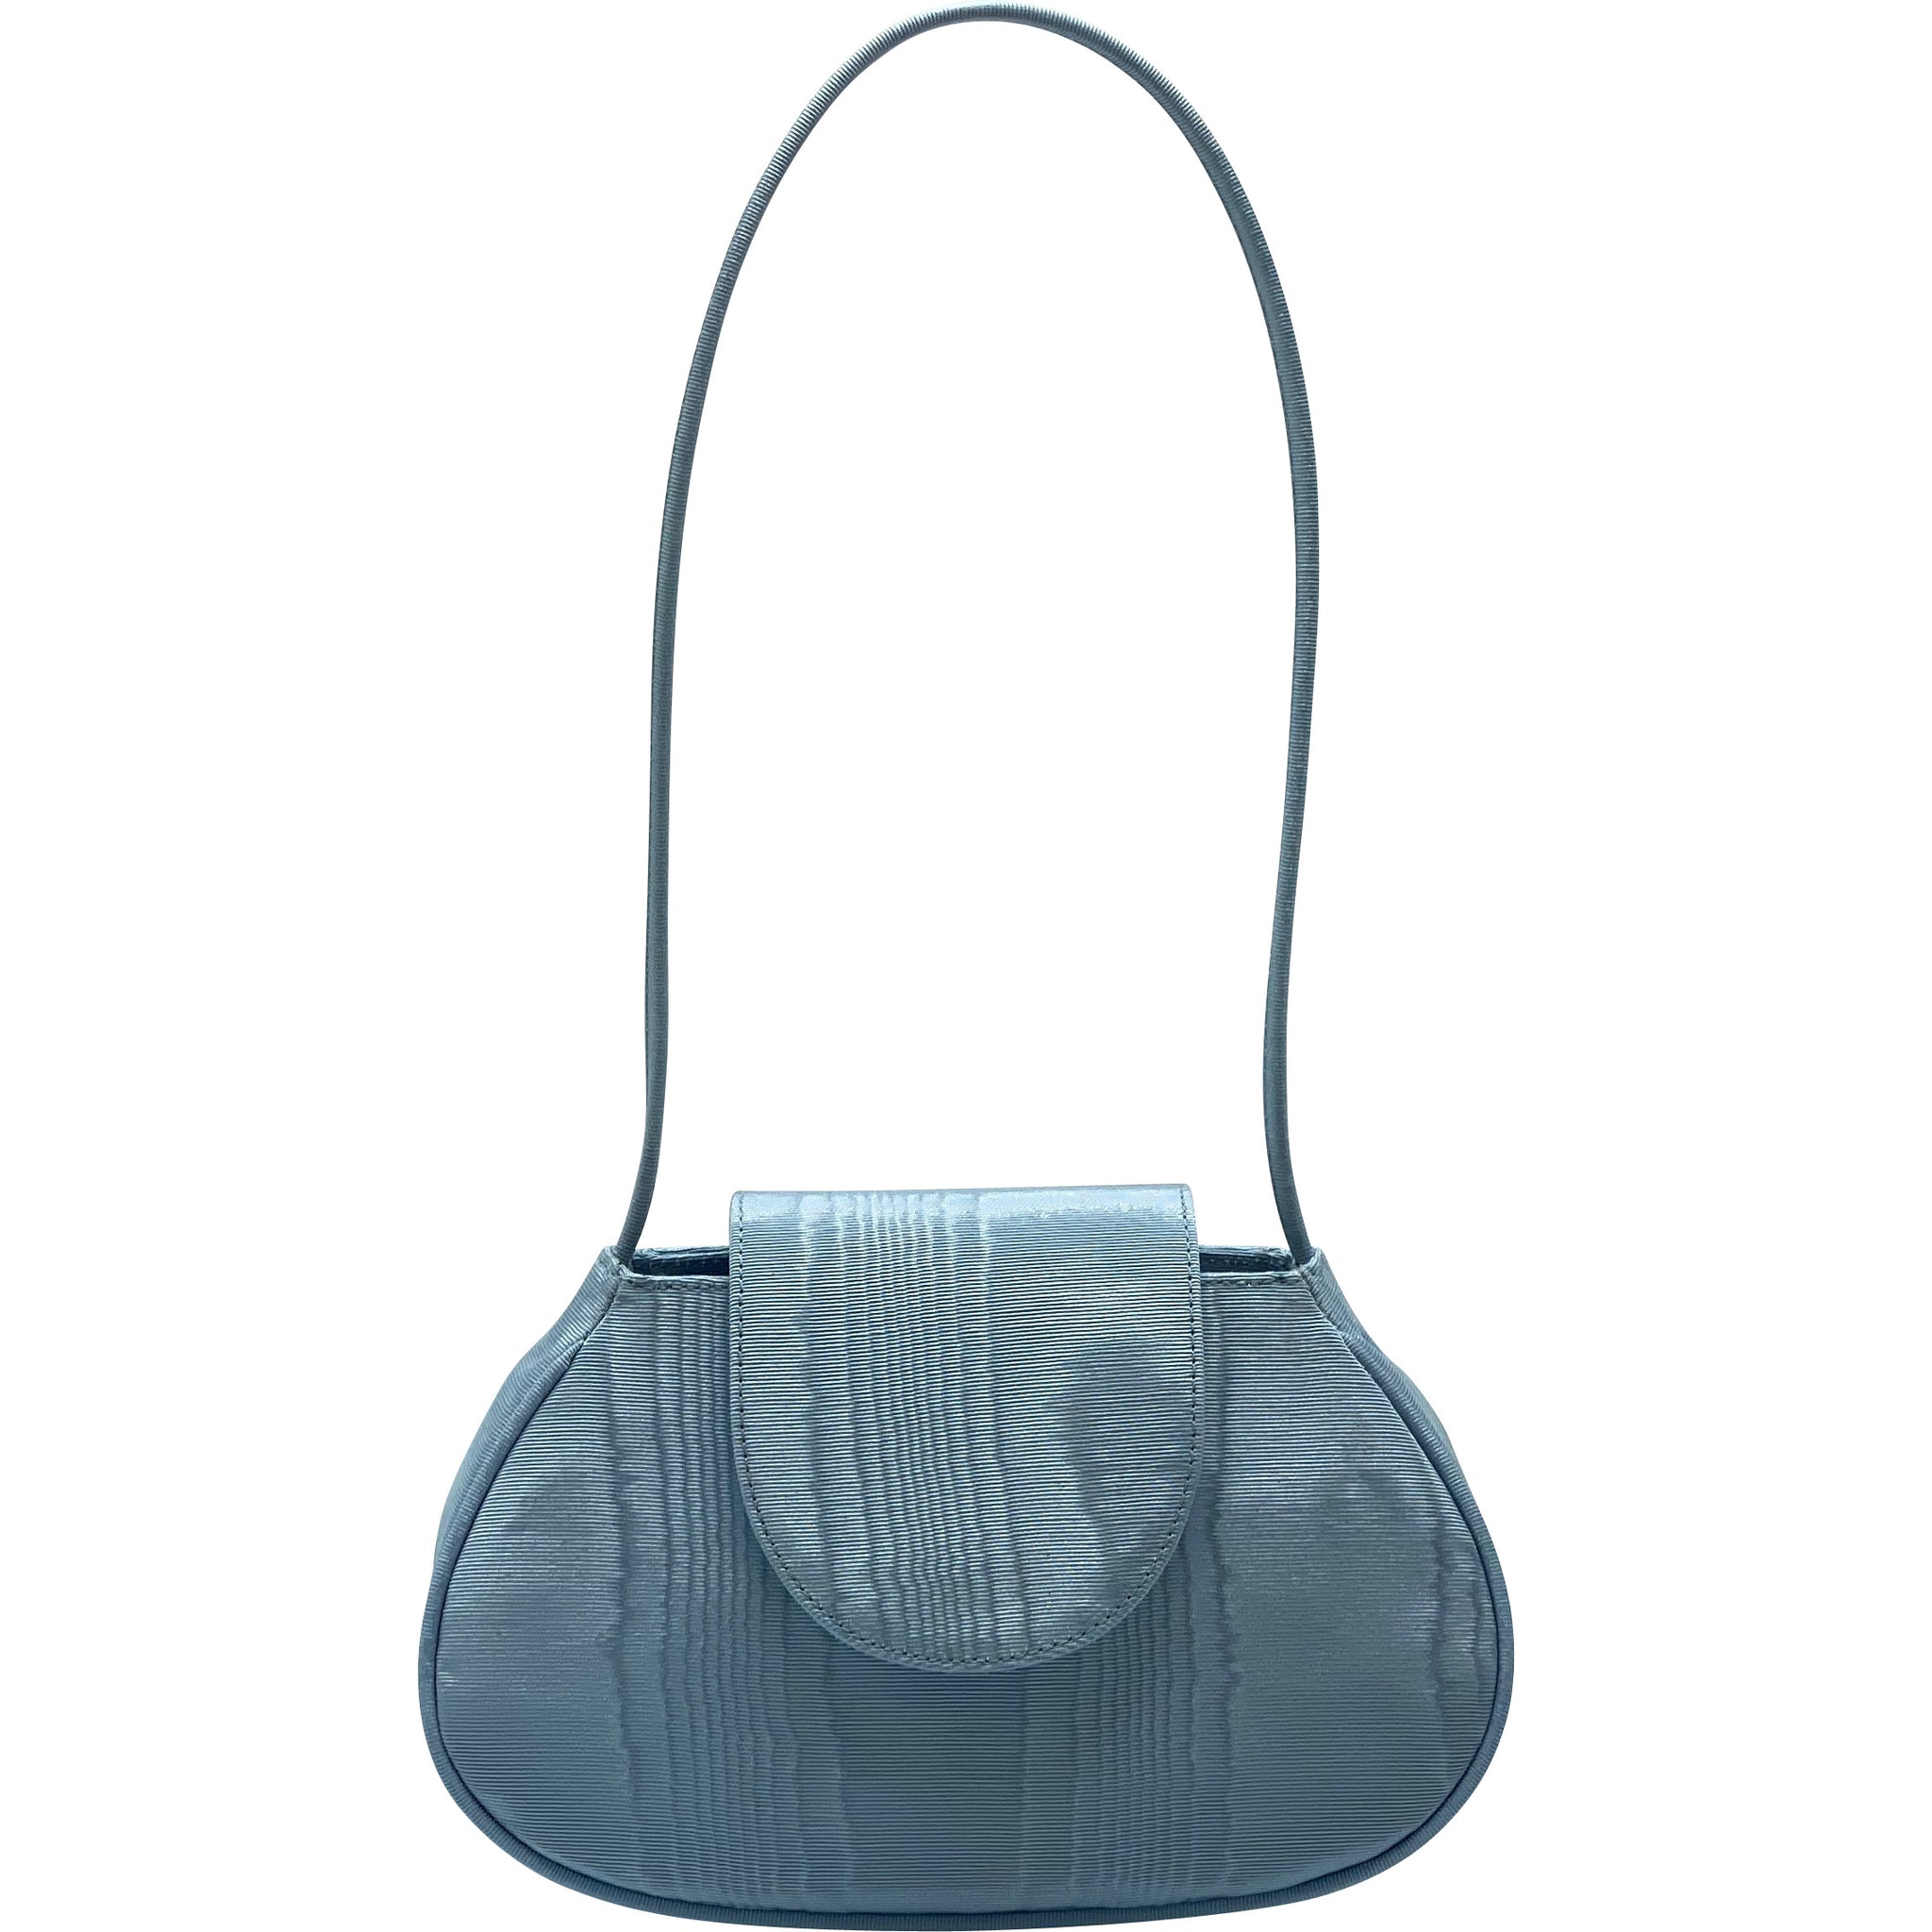 Ineva Baguette in Alice Blue Moire - For the Ages